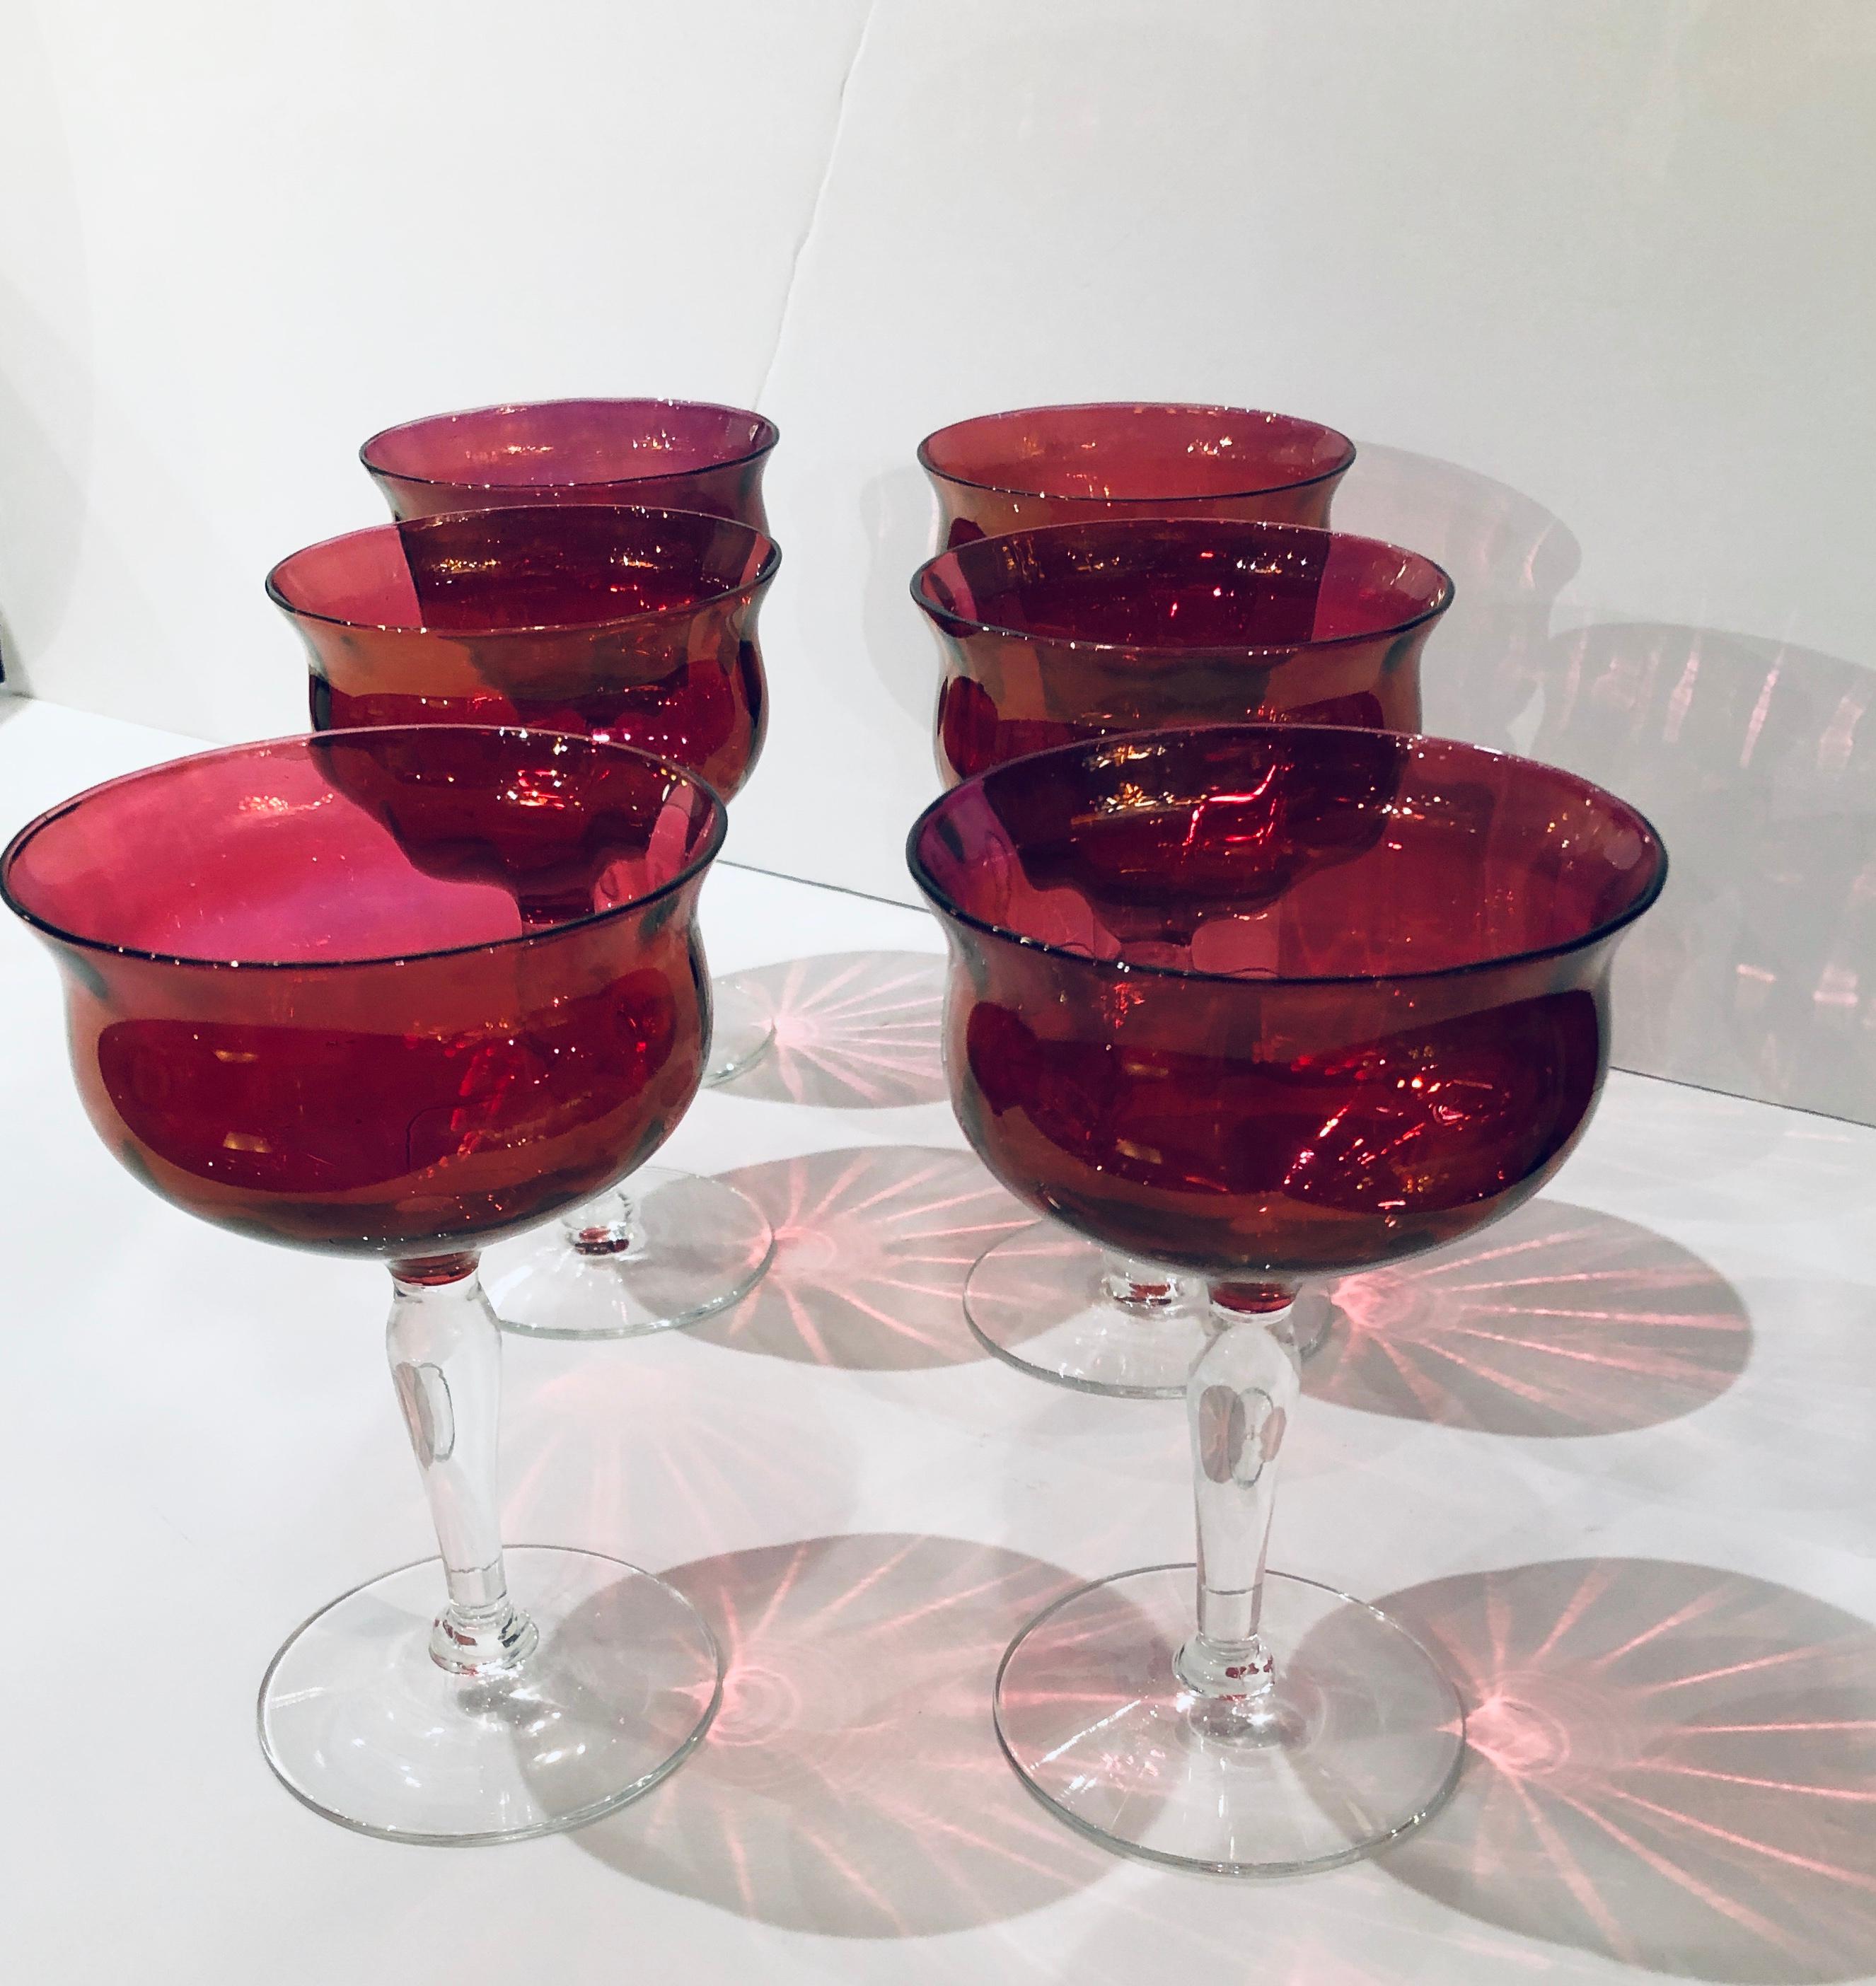 Details about   6 Piper Heidsieck Champagne Glasses Piscine Series Coupe Style Ruby Red Glass 